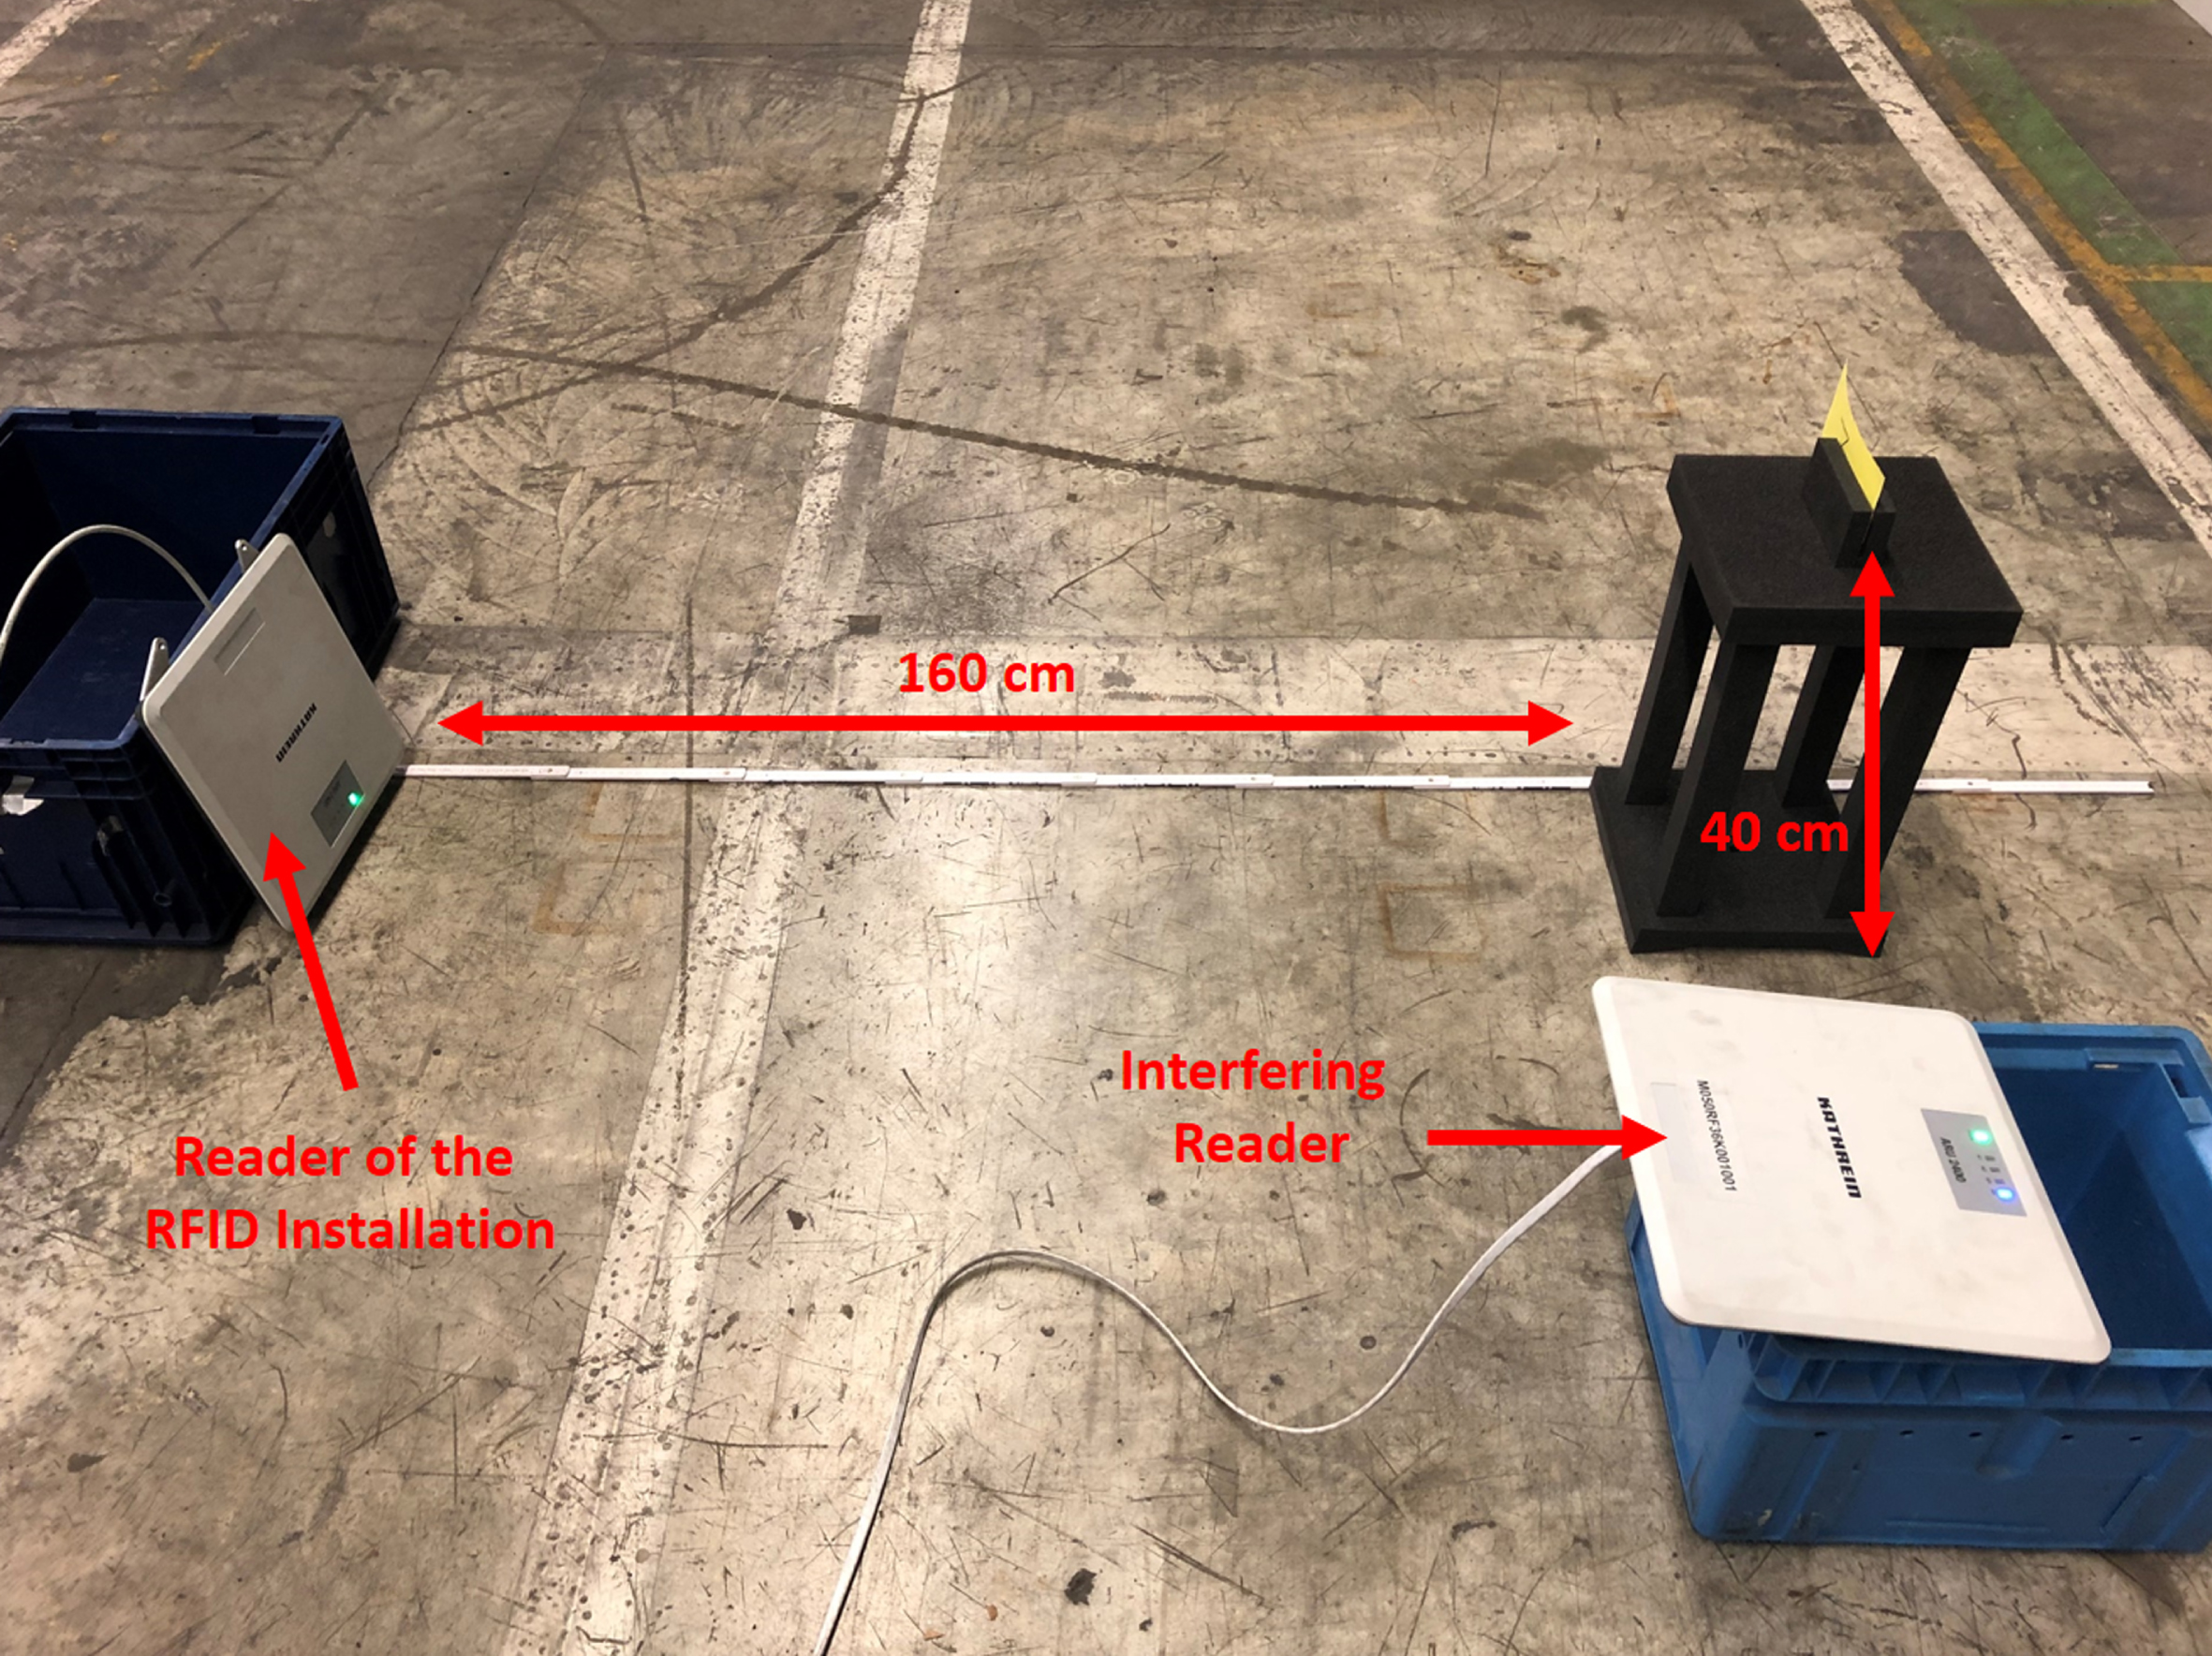 Experimental setup for verification of the reader interference test.